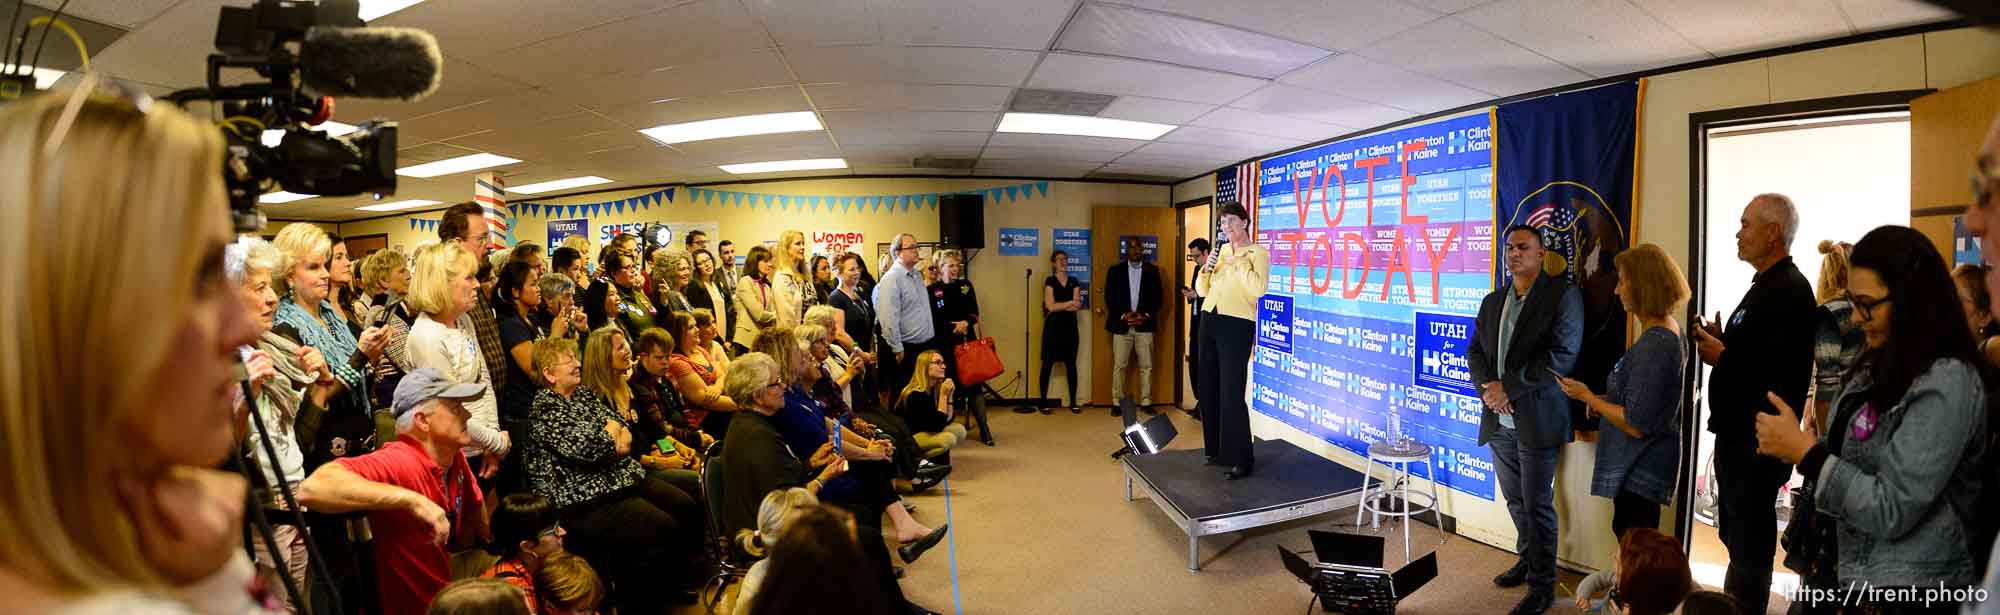 Trent Nelson  |  The Salt Lake Tribune
Anne Holton, the wife of vice presidential nominee Tim Kaine, meets with volunteers and supporters at the Hillary for Utah headquarters in Salt Lake City to talk about early voting, Friday November 4, 2016.